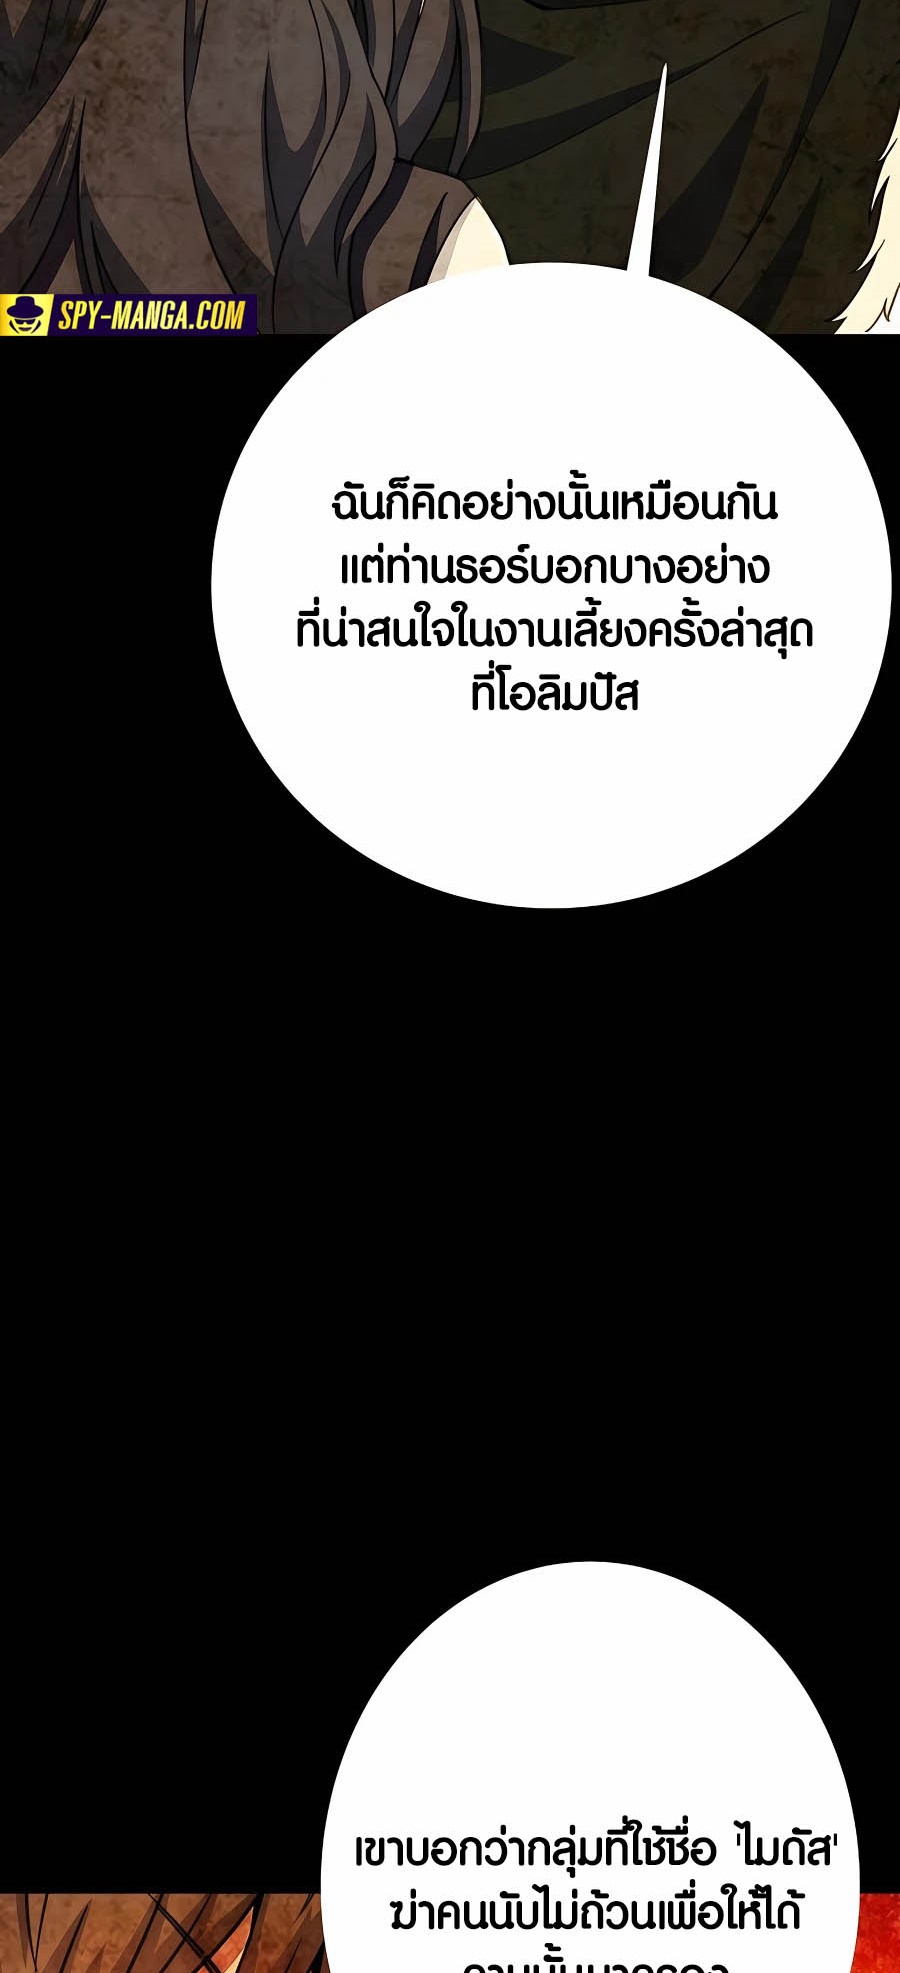 à¸­à¹ˆà¸²à¸™à¸¡à¸±à¸™à¸®à¸§à¸² à¹€à¸£à¸·à¹ˆà¸­à¸‡ The Part Time Land of the Gods 56 47